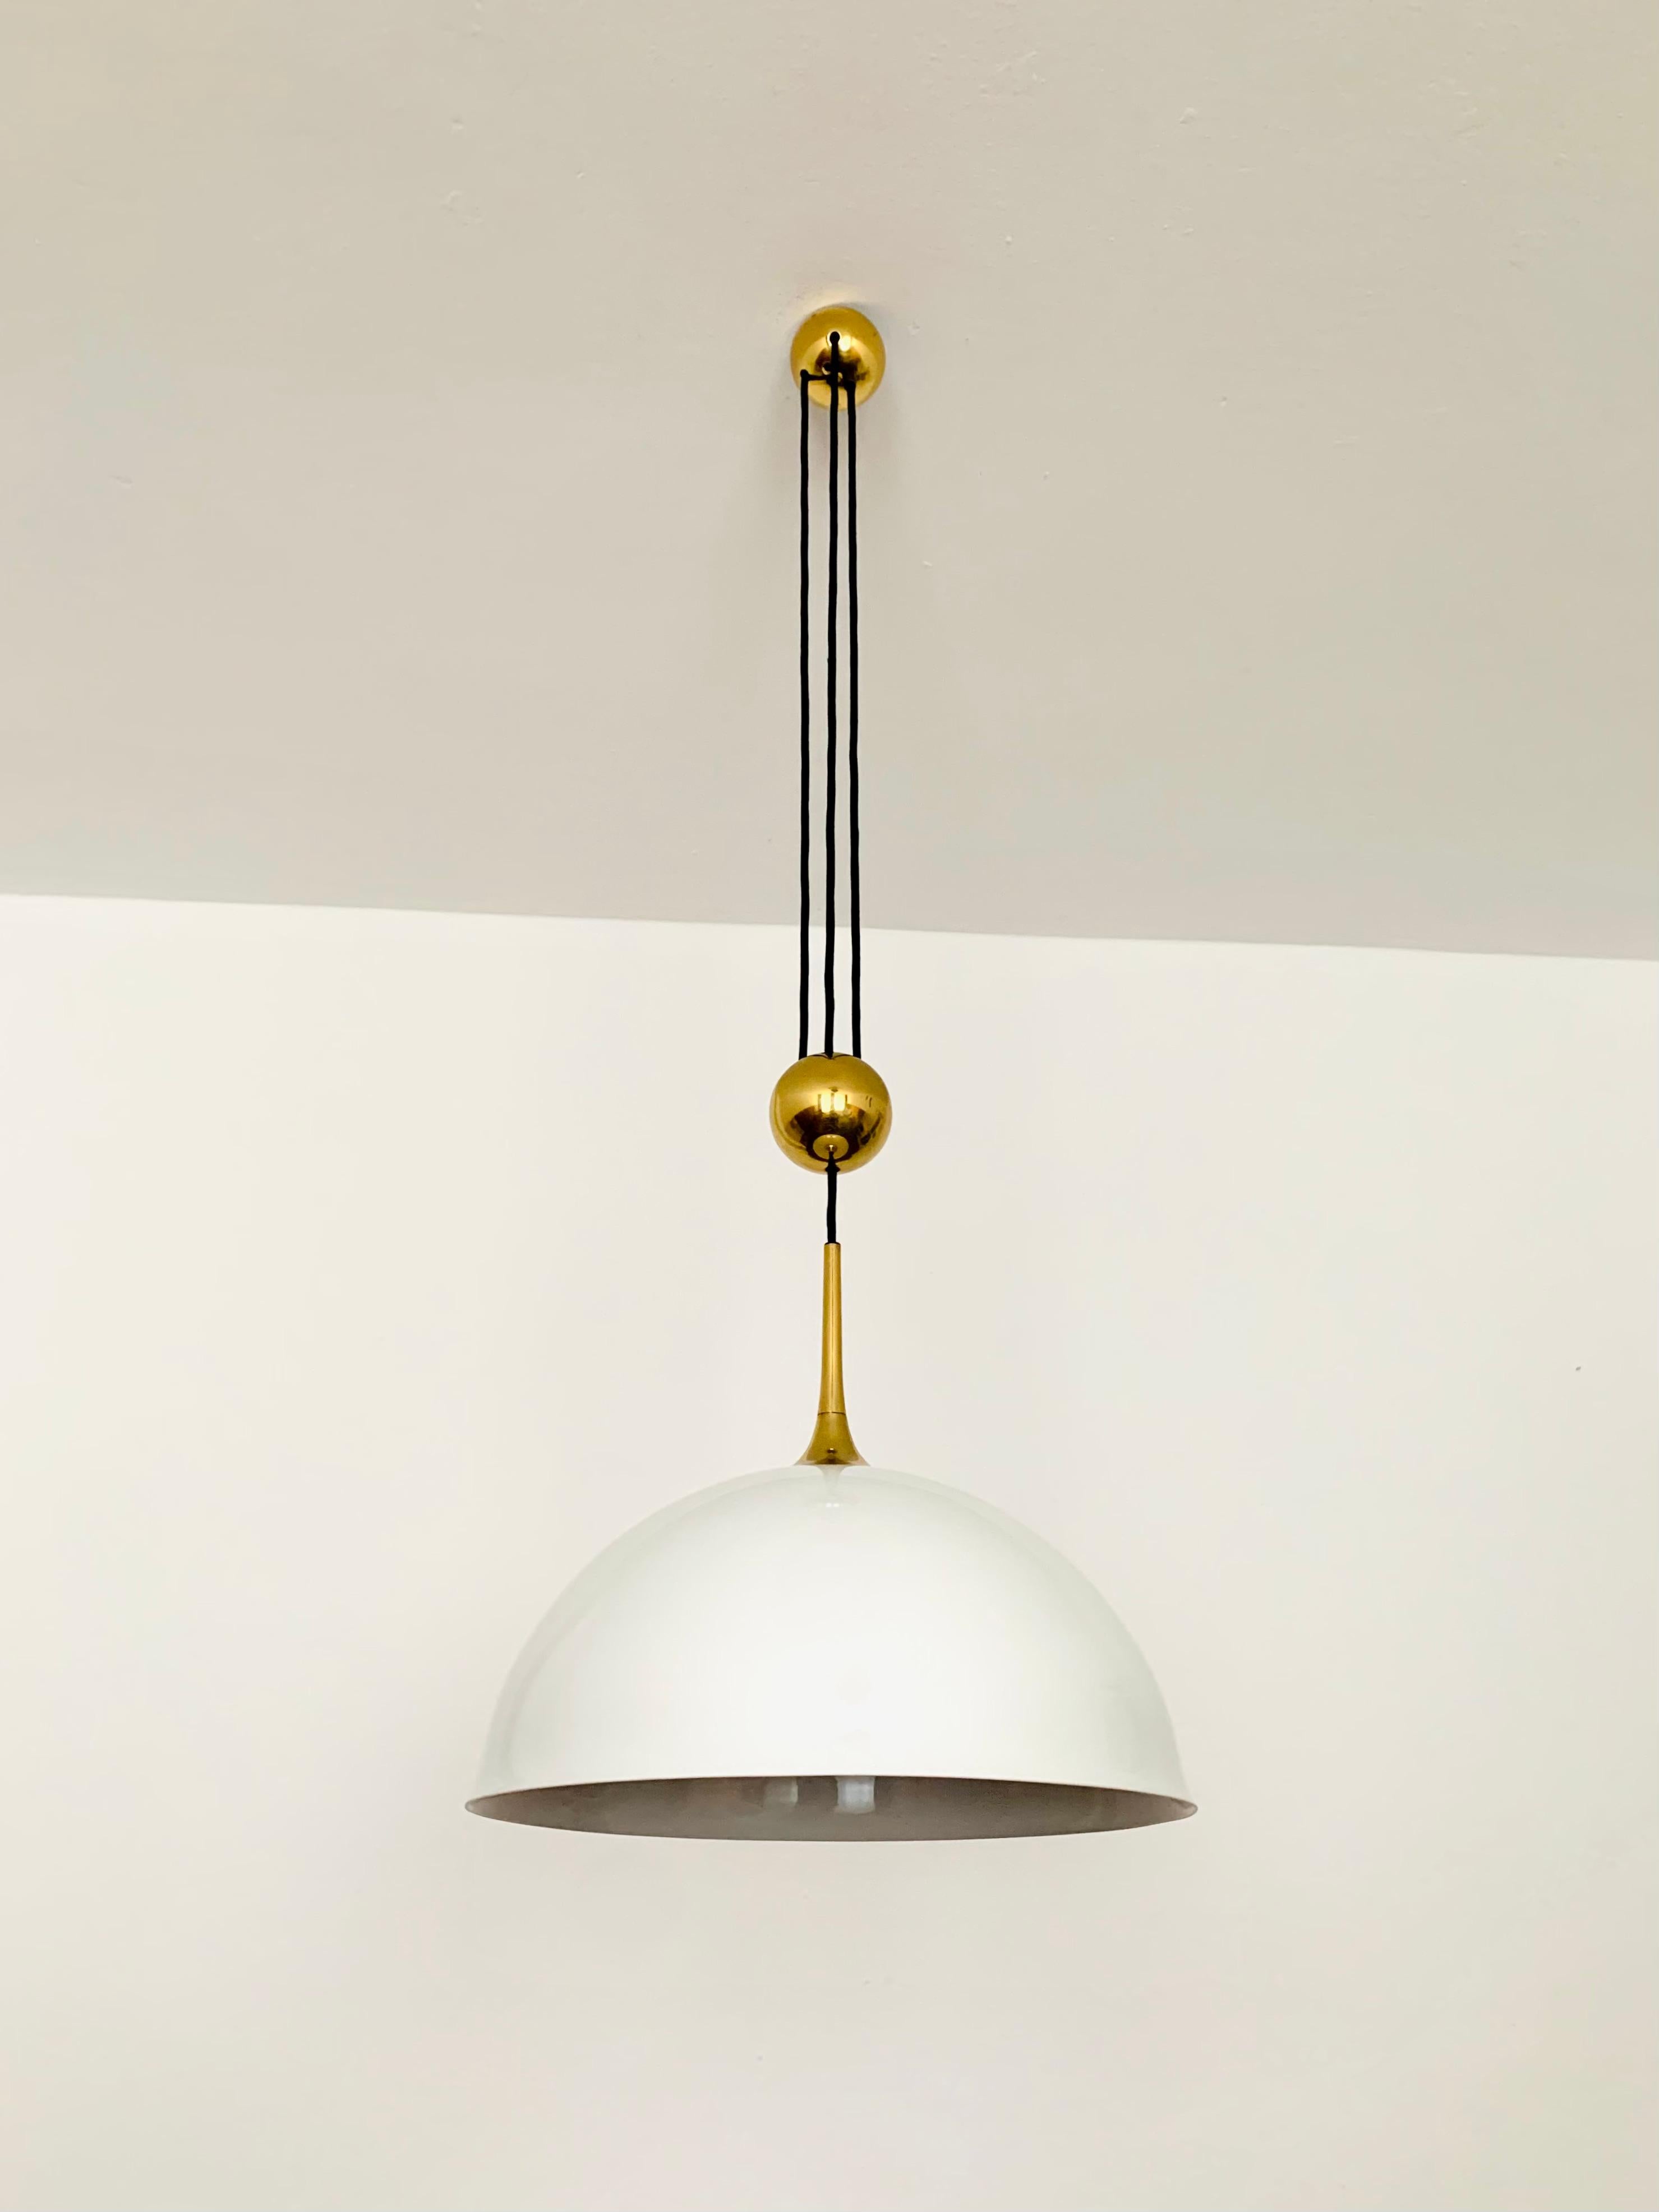 German Posa Pendant Lamp with Porcelain Shade by Florian Schulz For Sale